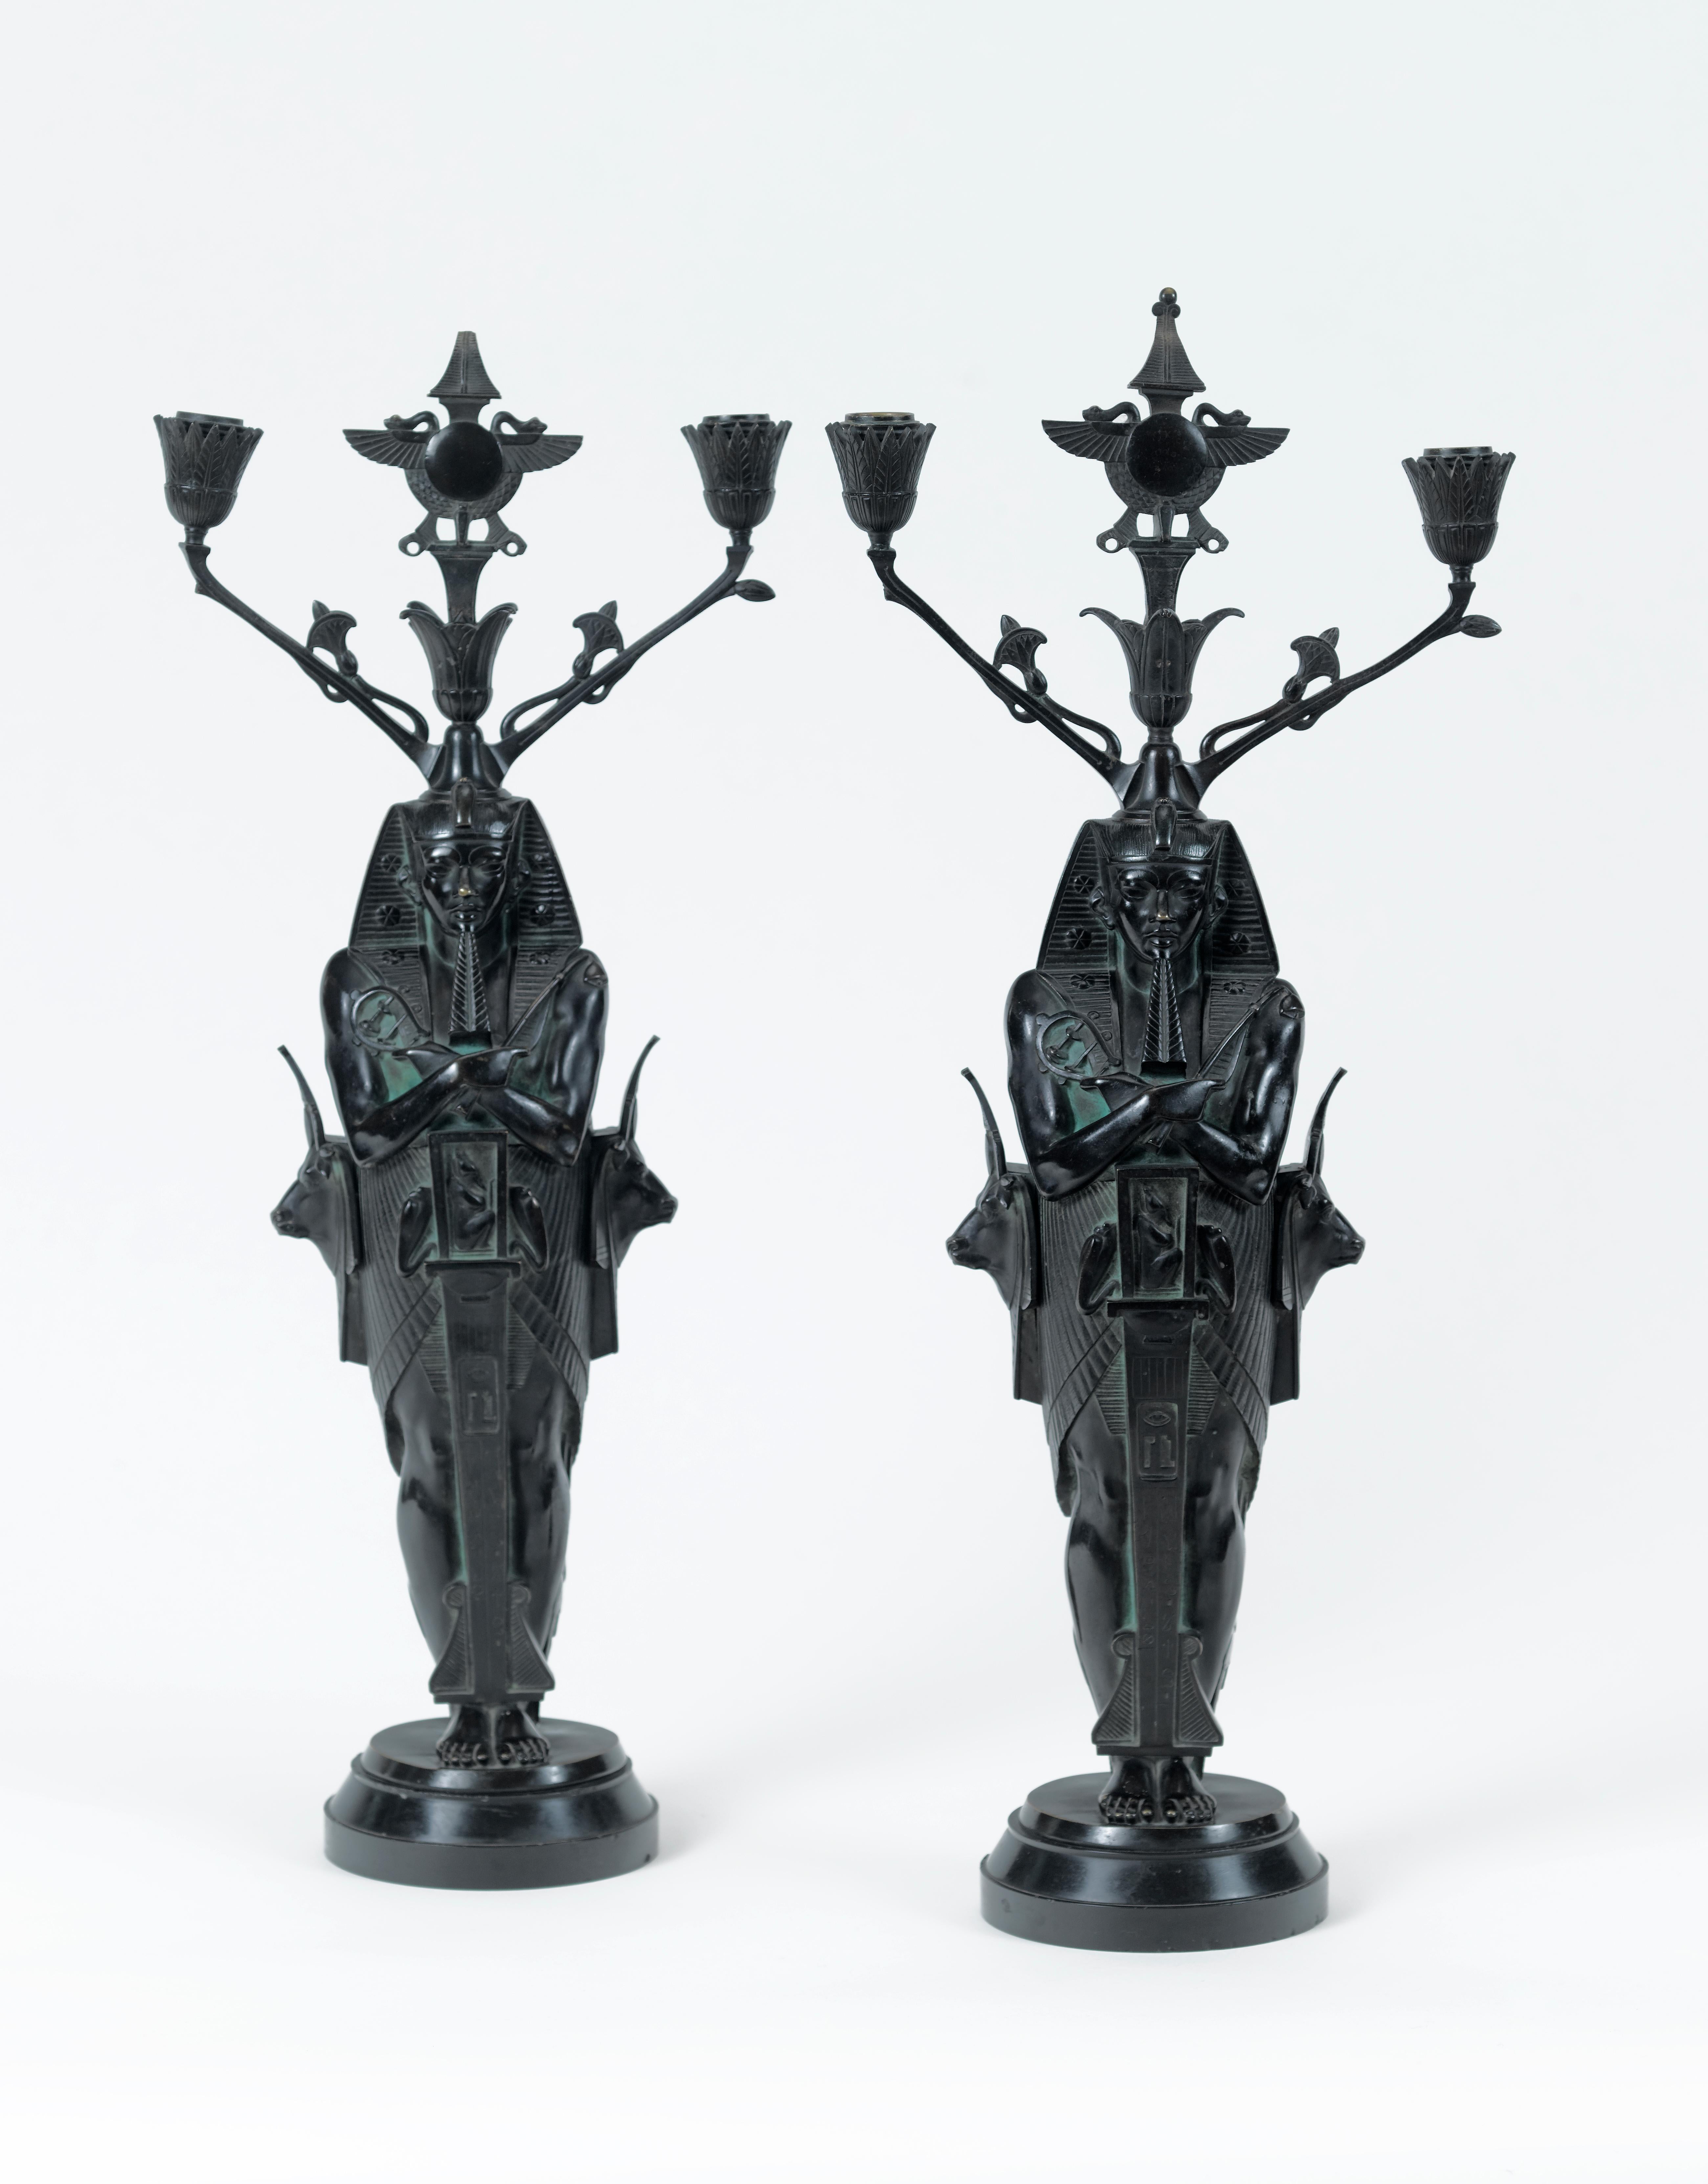 A very decorative pair of Egyptian revival patinated bronze candelabra, modelled as a pharoah supporting the central Egyptian symbol of Re, a sun disk, laterally two arms decorated with stylized lotus leaves, supporting cone-shaped nozzles, the back